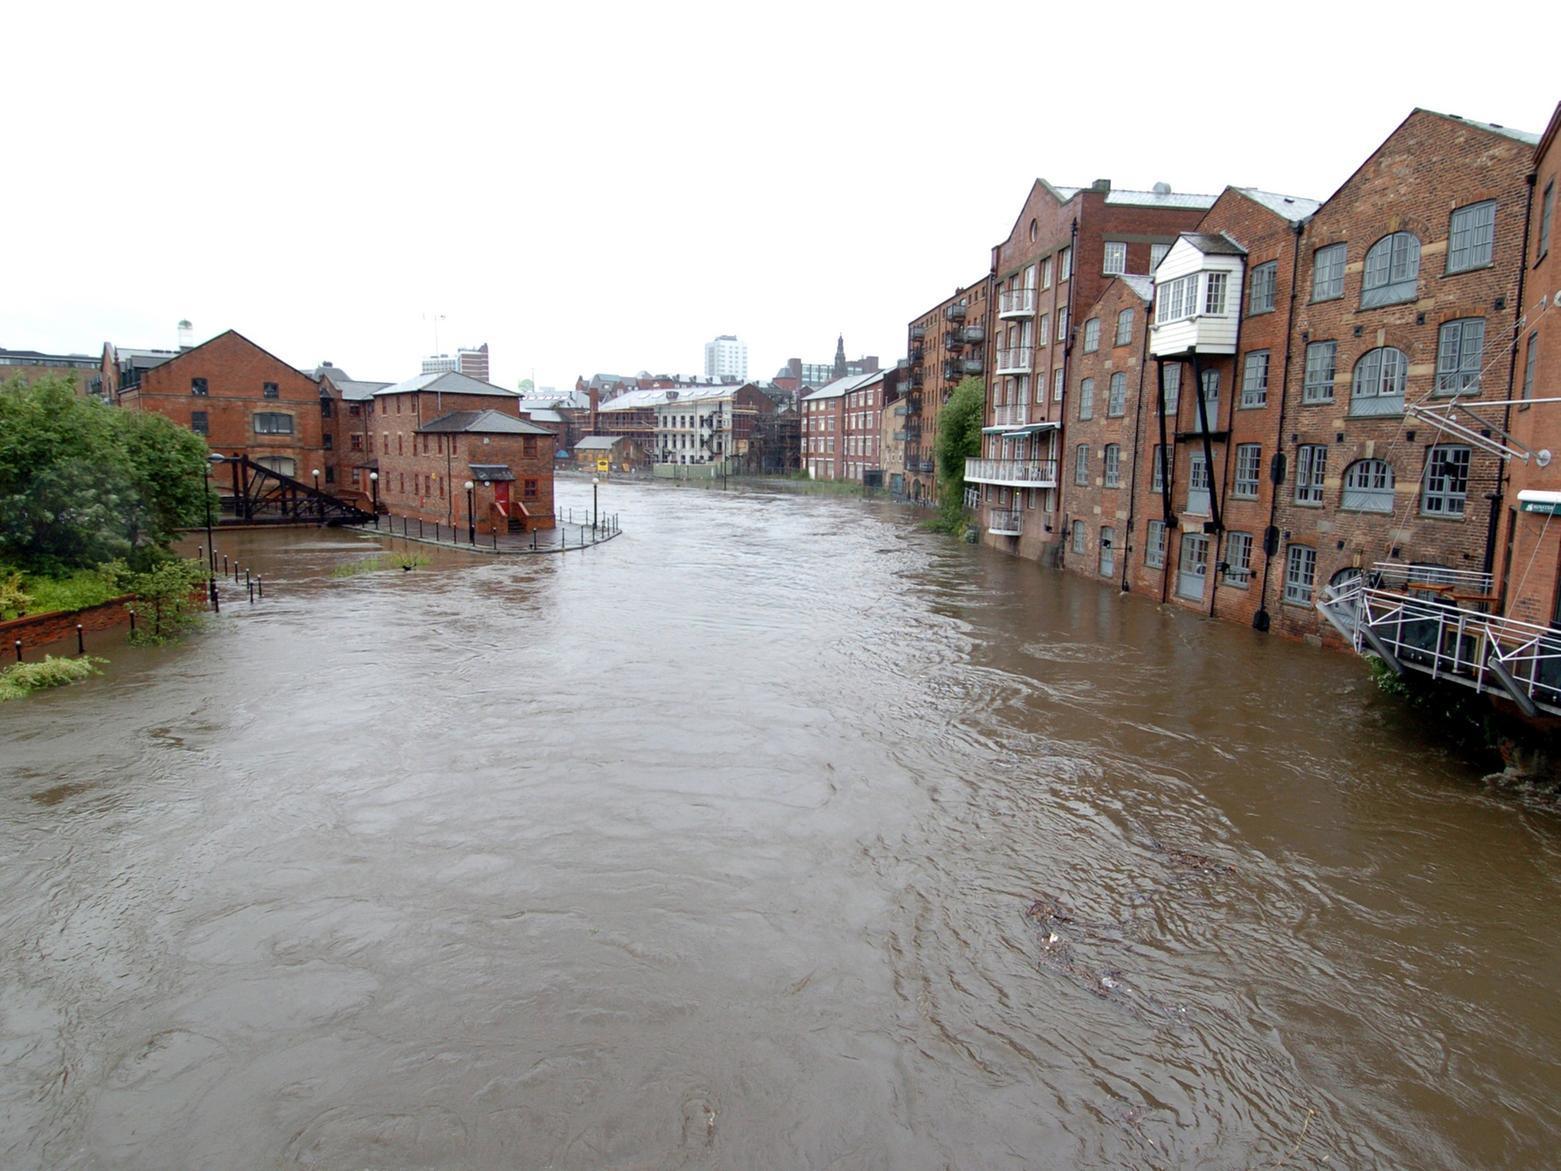 The flooded River Aire in the city centre.